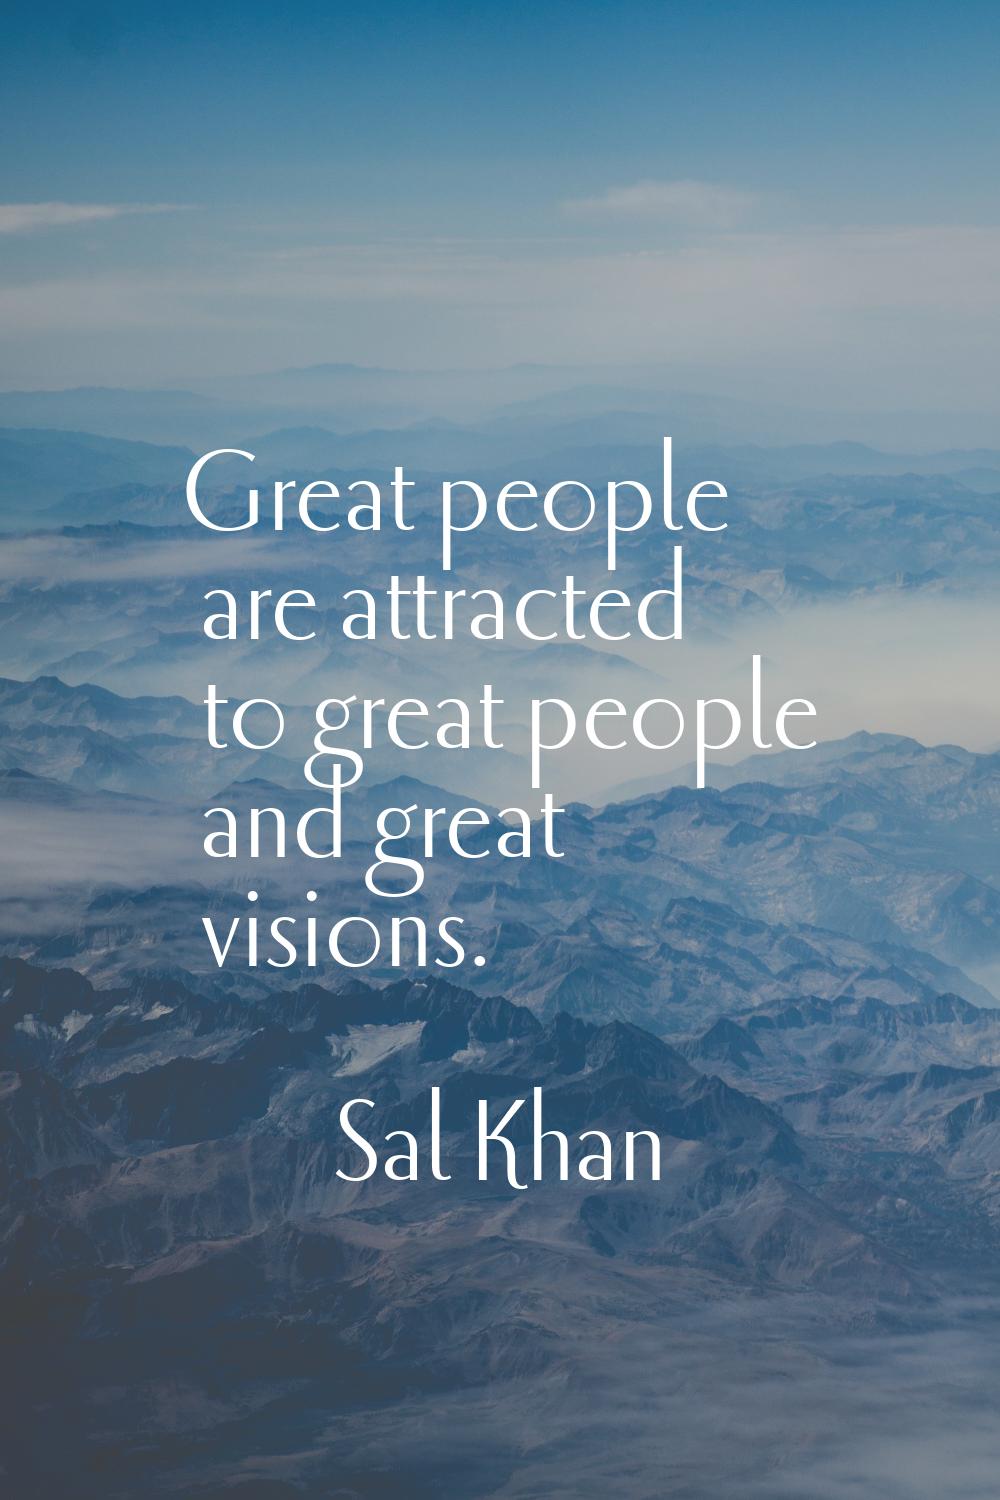 Great people are attracted to great people and great visions.